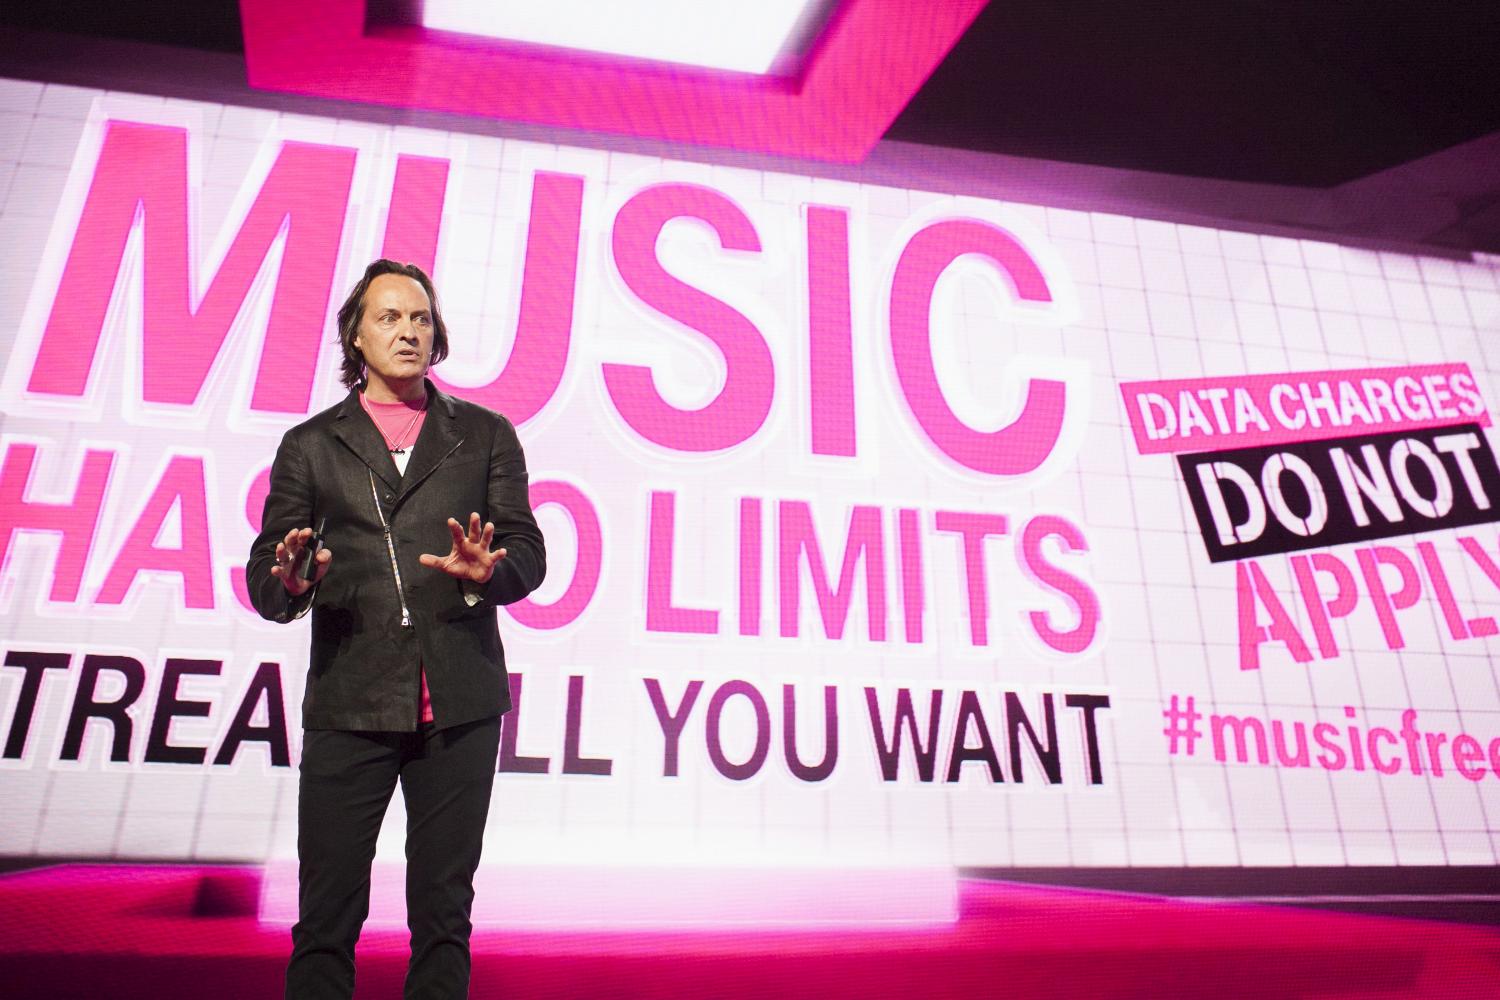 T-Mobile CEO John Legere speaks during an event in Seattle on Wednesday, June 18, 2014 (Matthew Williams -- Bloomberg / Getty Images)